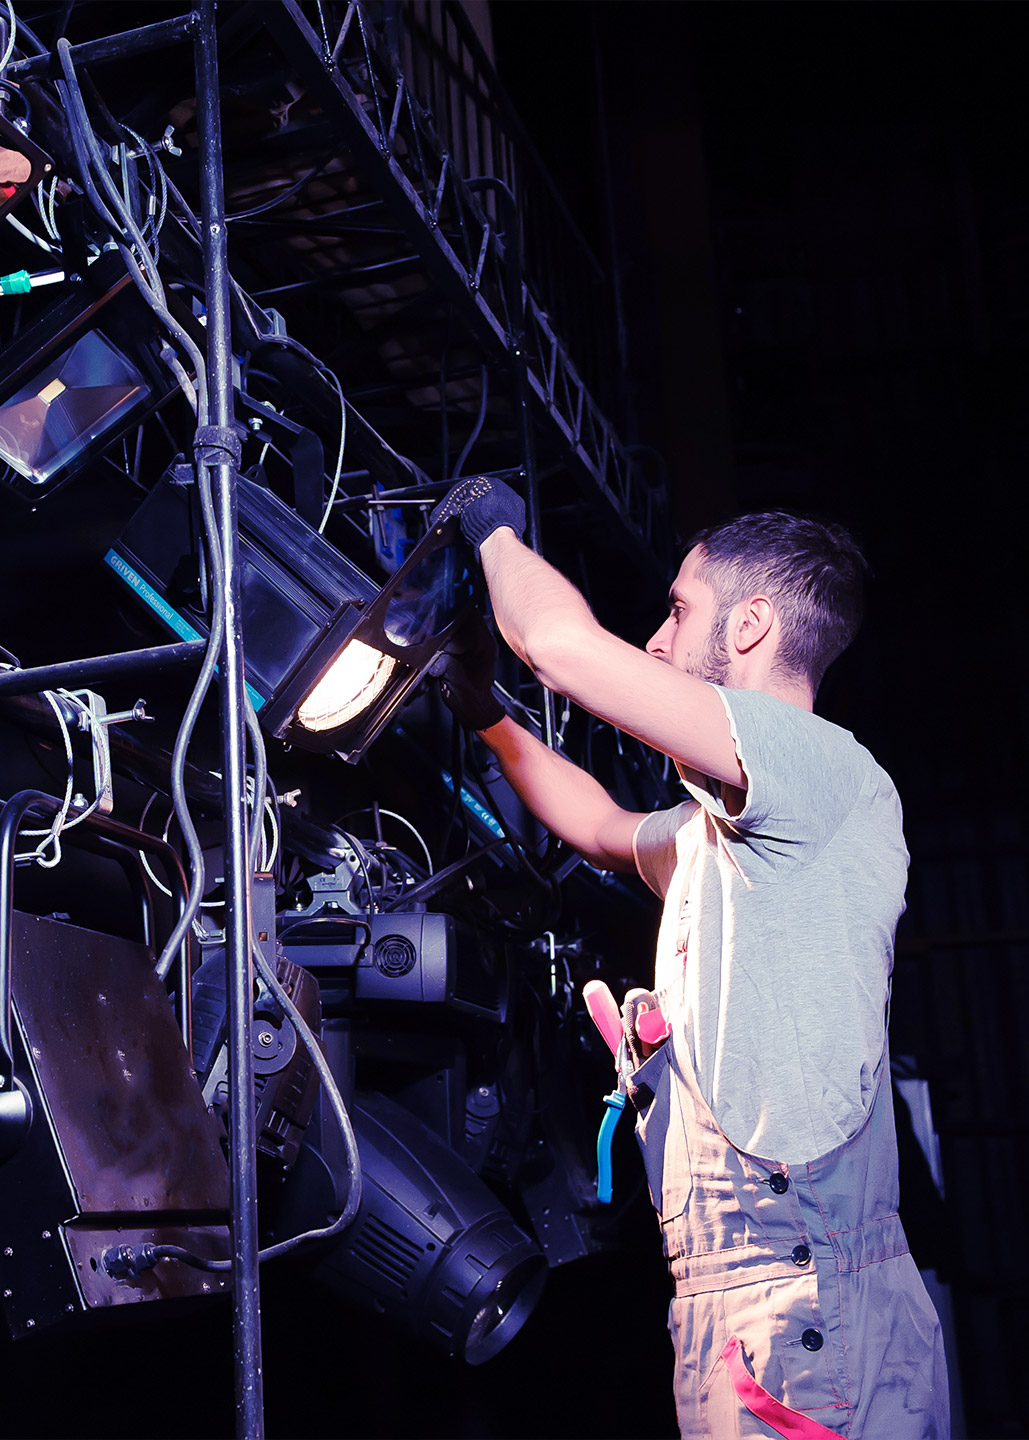 A man adjusting the lighting equipment at a live show.